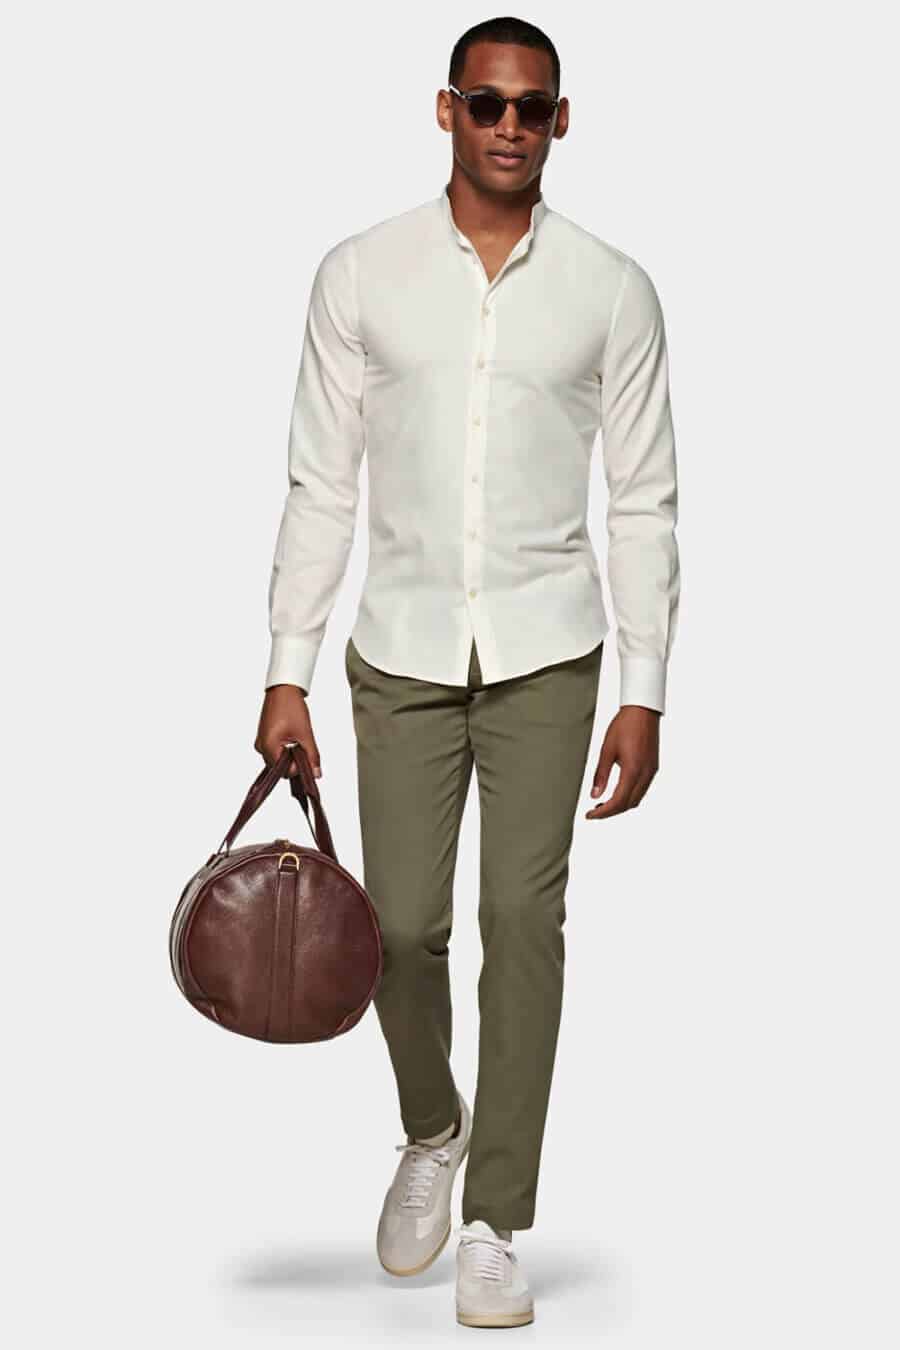 Men's tailored green pants, white shirt and sneakers outfit